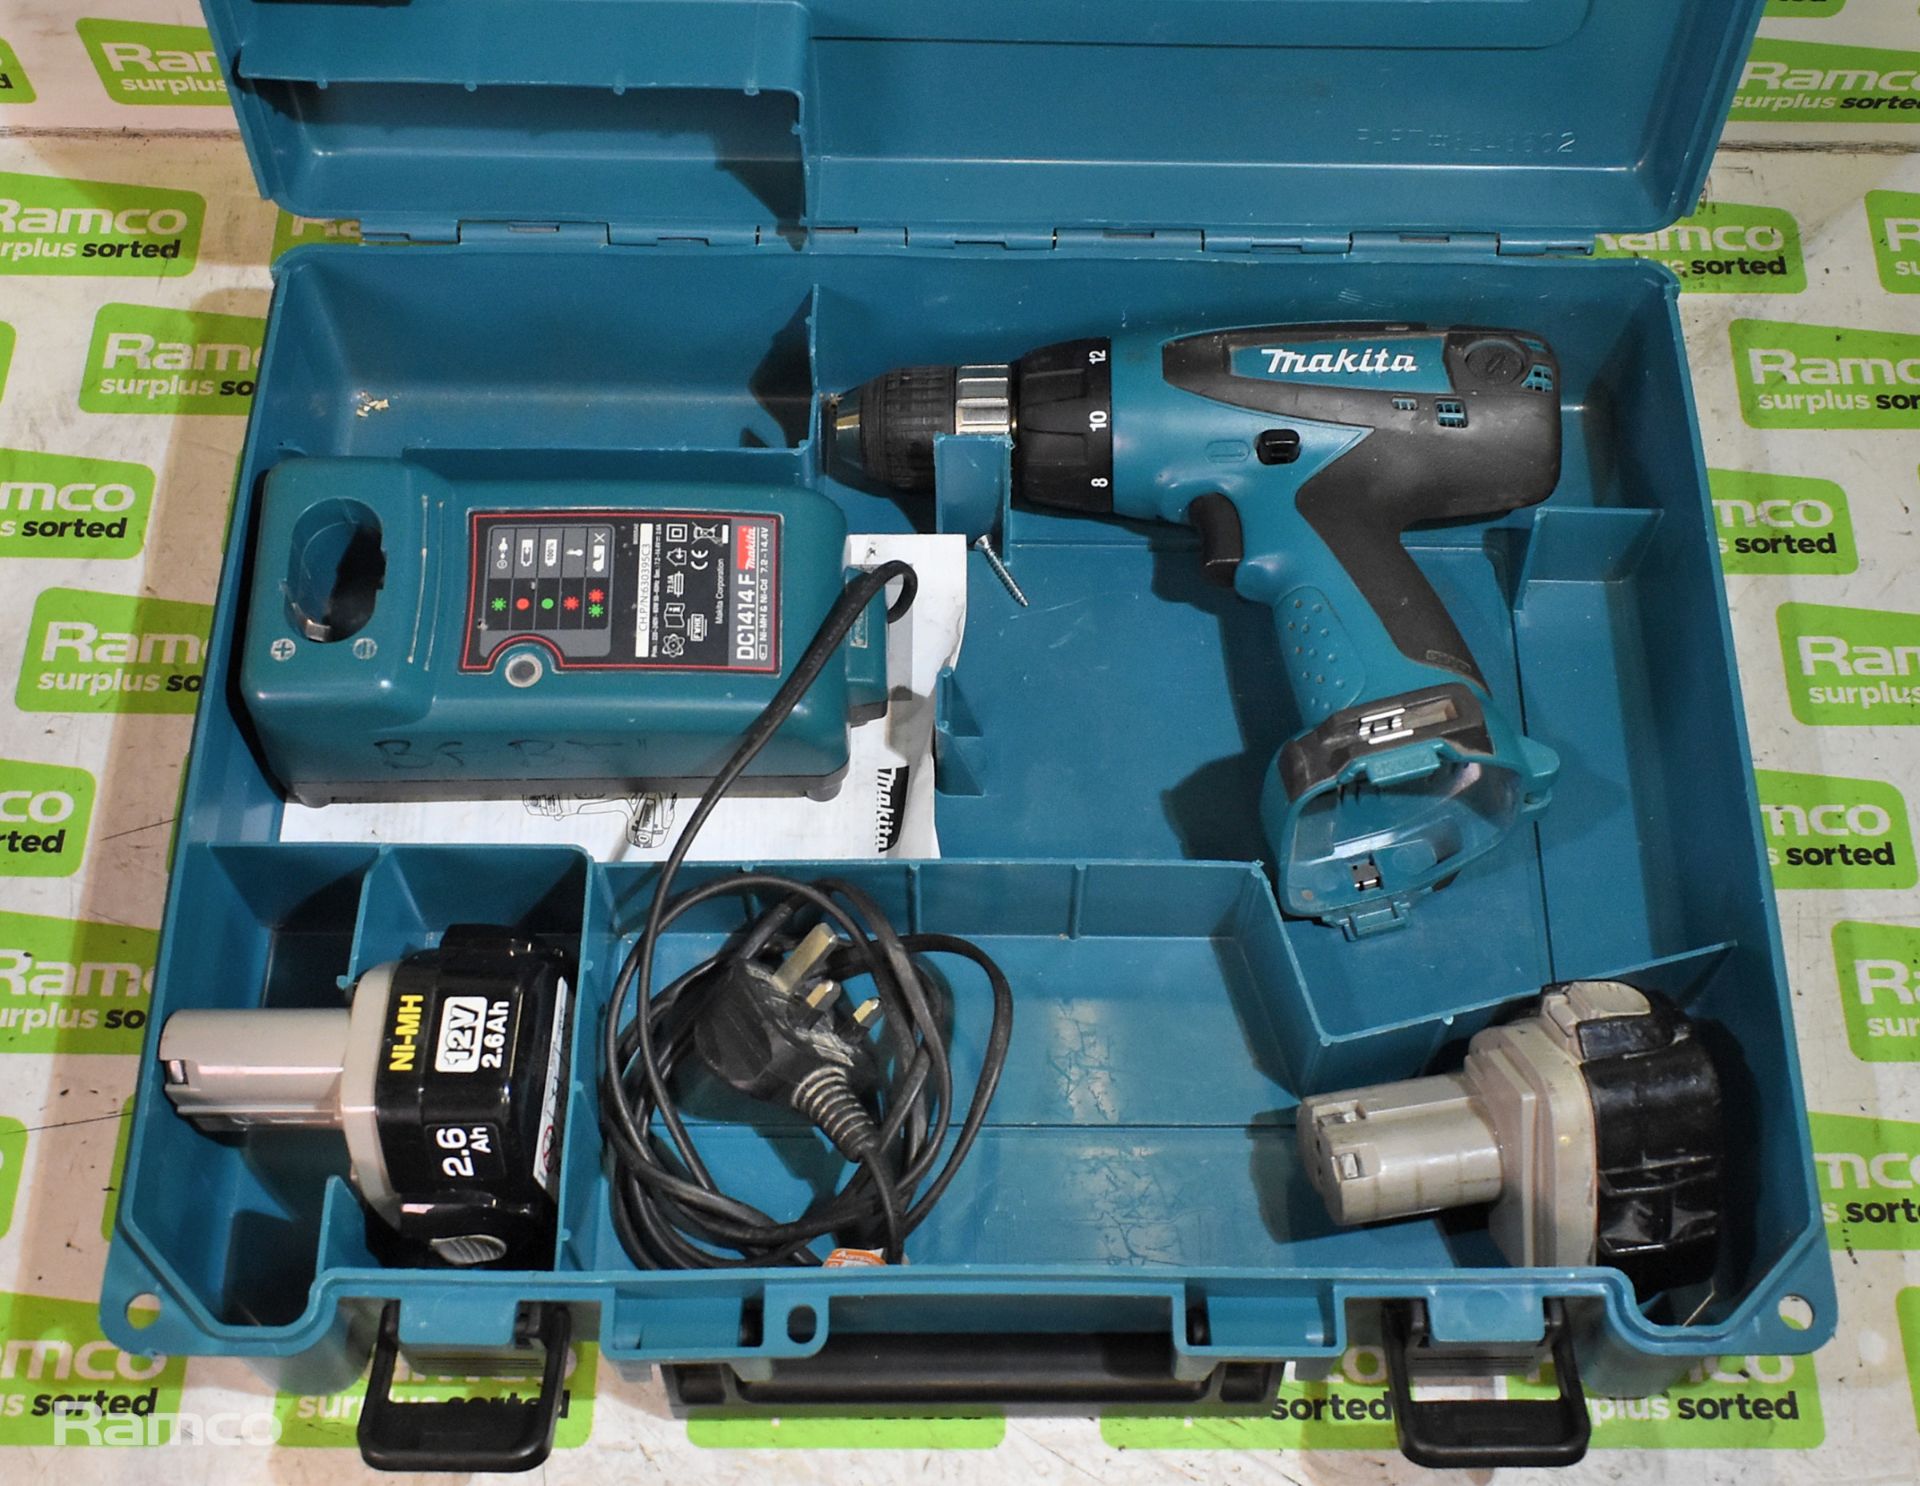 Makita 6317D cordless drill - DC1414F charger - 2 x 12V batteries - case - Image 2 of 6